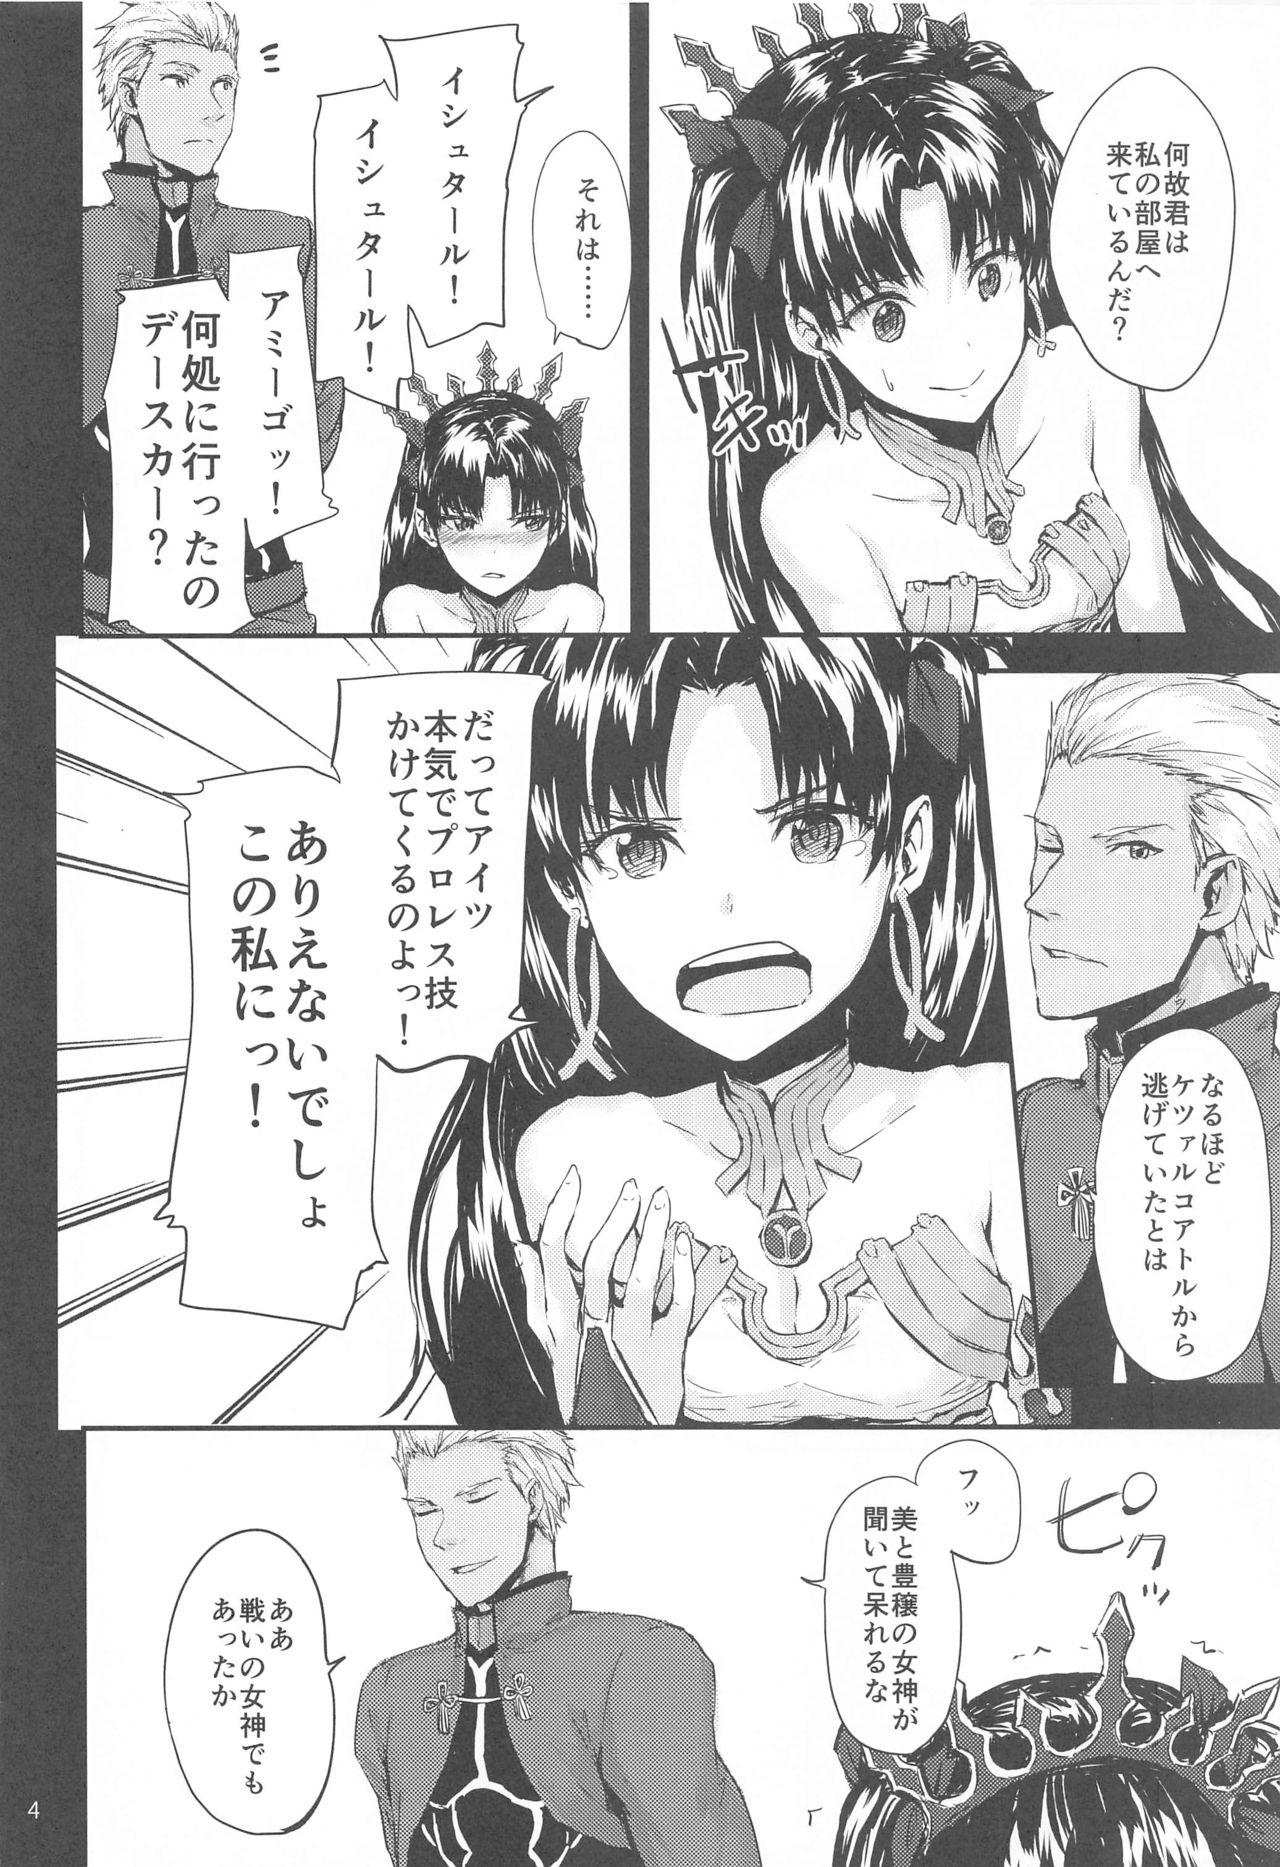 Male Sextet Girls 4 - Fate grand order Granblue fantasy Gozo - Page 5